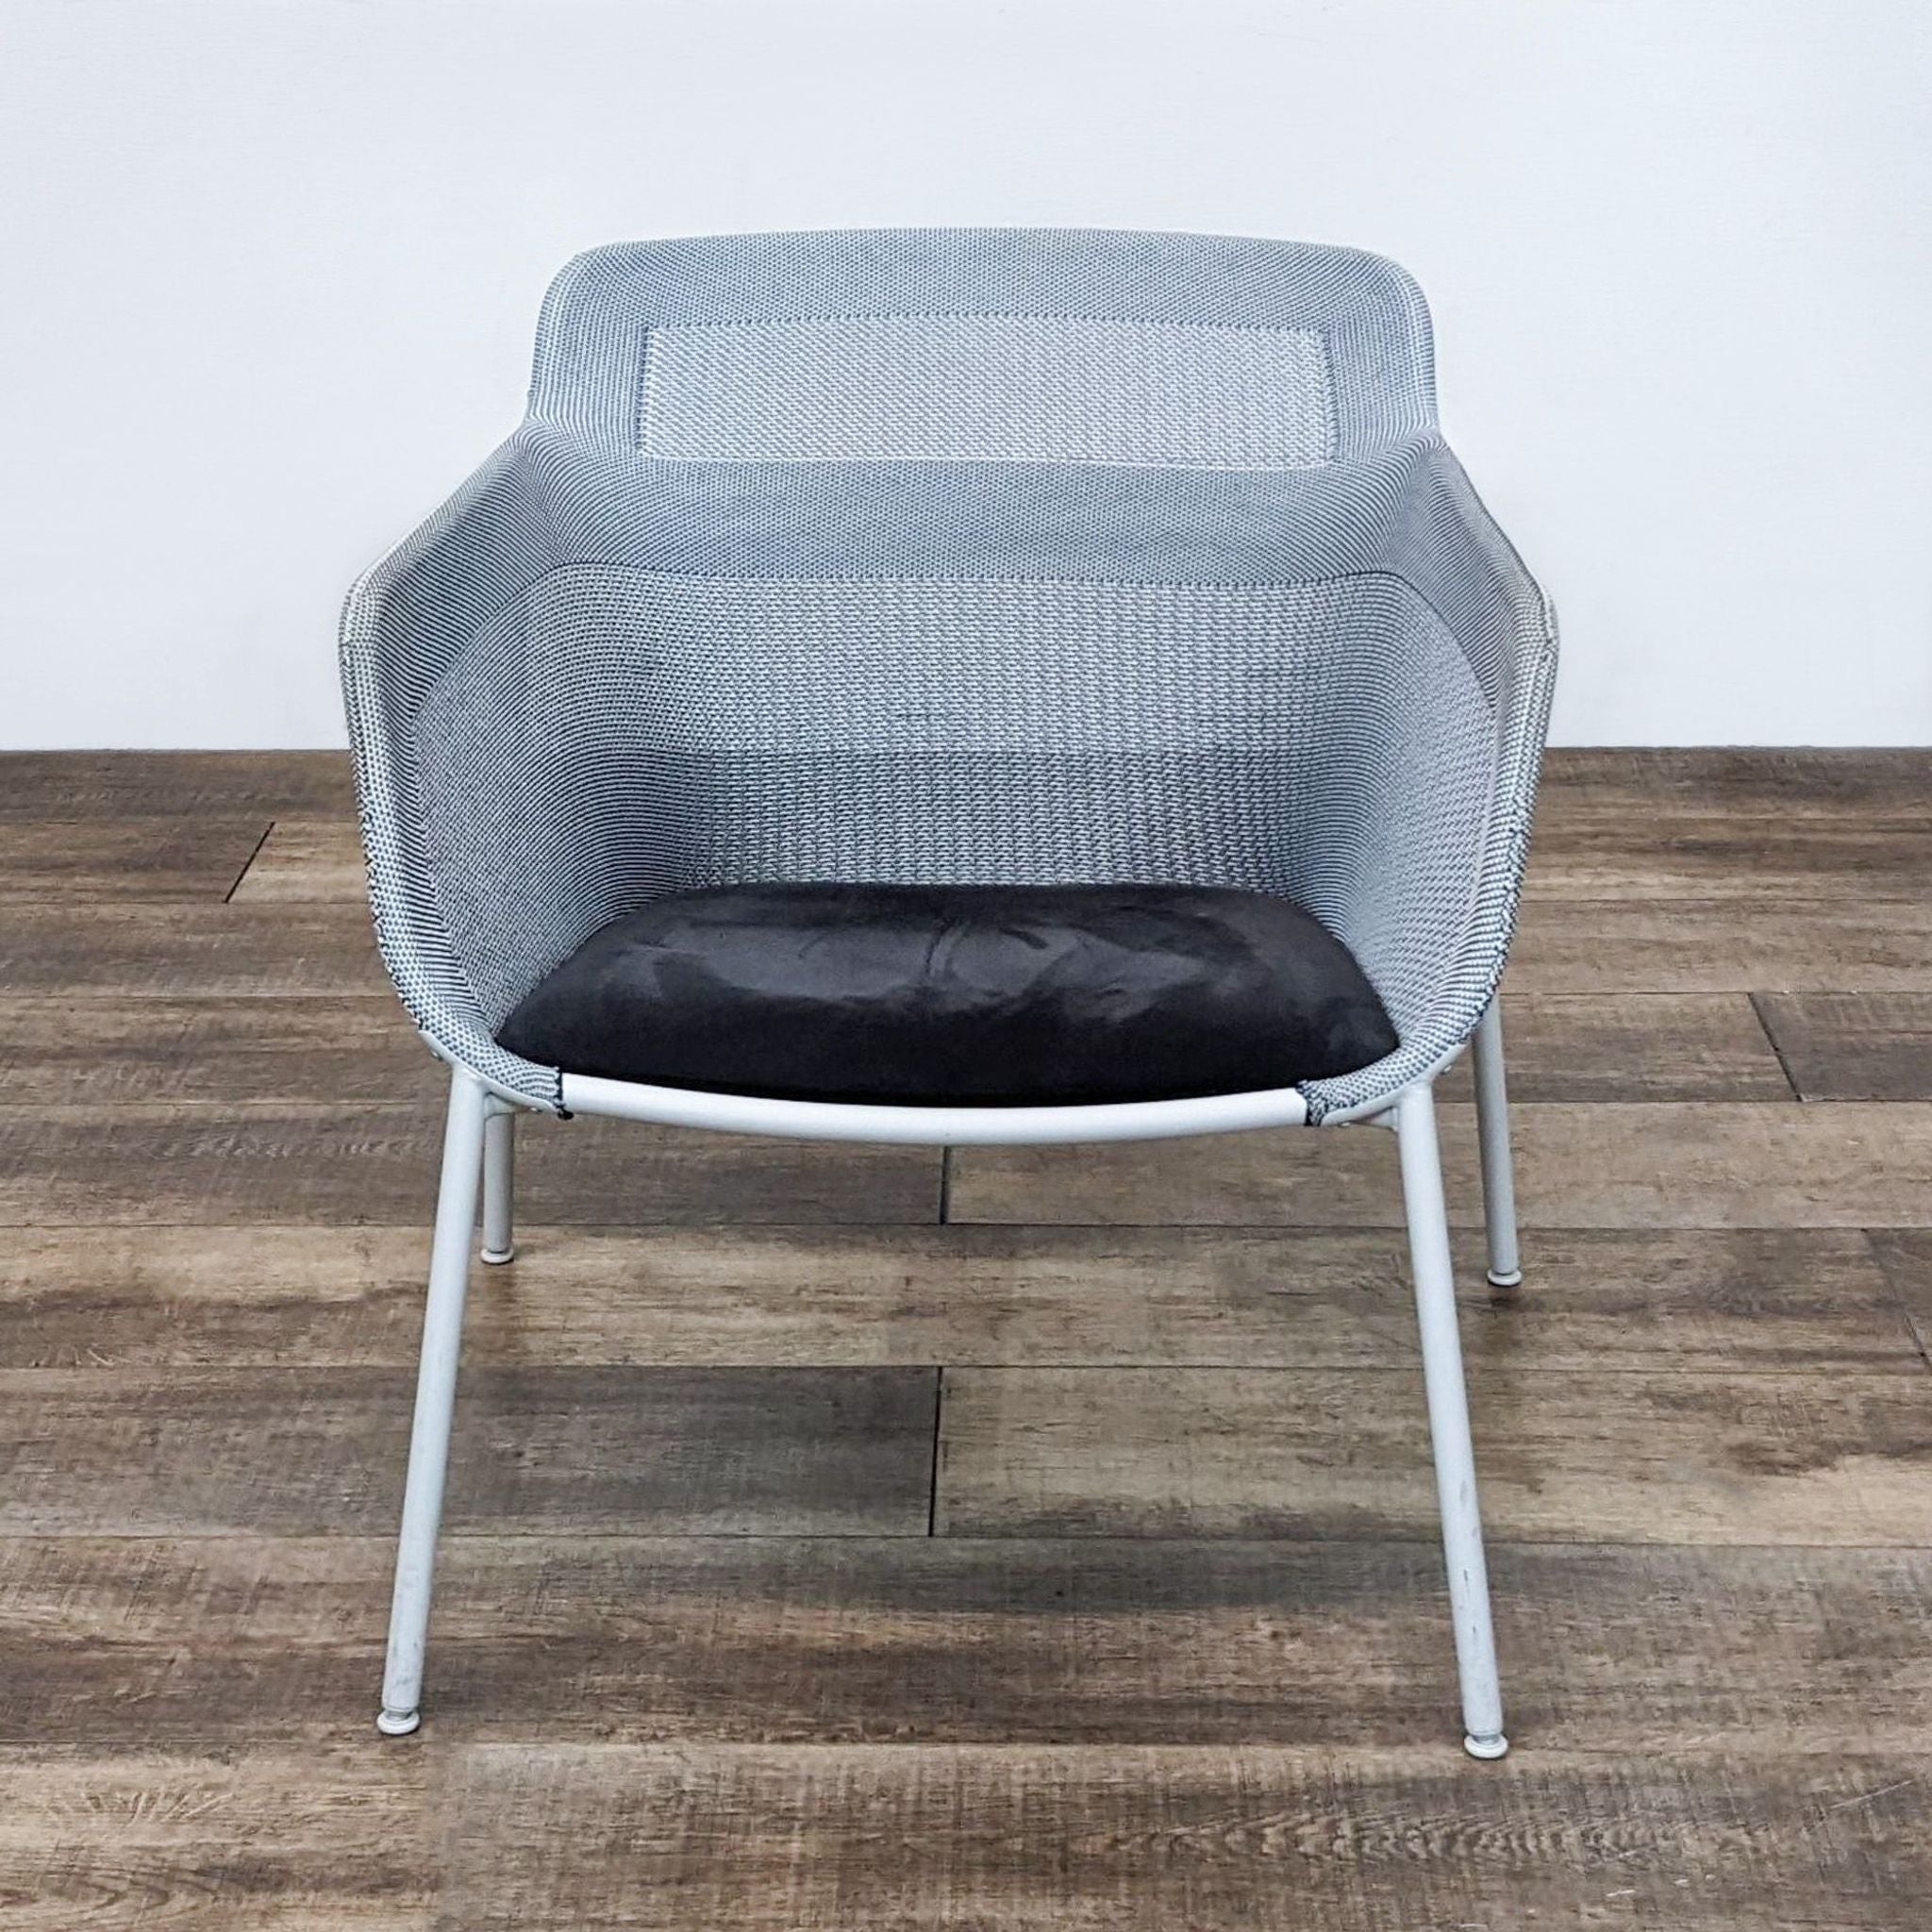 1. IKEA PS 2017 light grey 3D-knitted chair with a transparent feel, metal legs, and a dark cushion, suitable for small spaces.